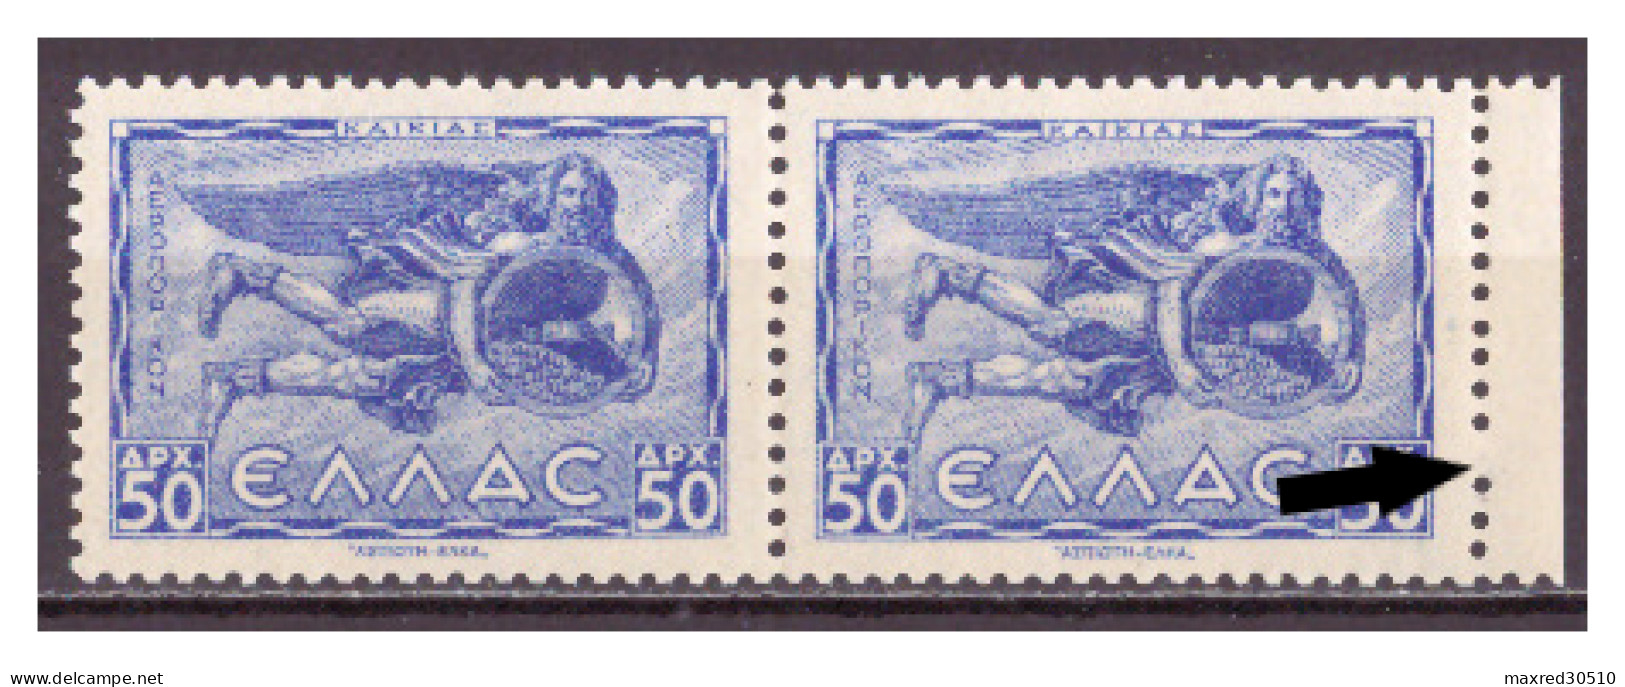 GREECE 1943 AIRPOST ISSUE HORIZONTAL PAIR 50DR. OF "WINDS II" WITH PRINTING ERROR AT THE RIGHT PERFORATION SEE DESCRIBE - Abarten Und Kuriositäten